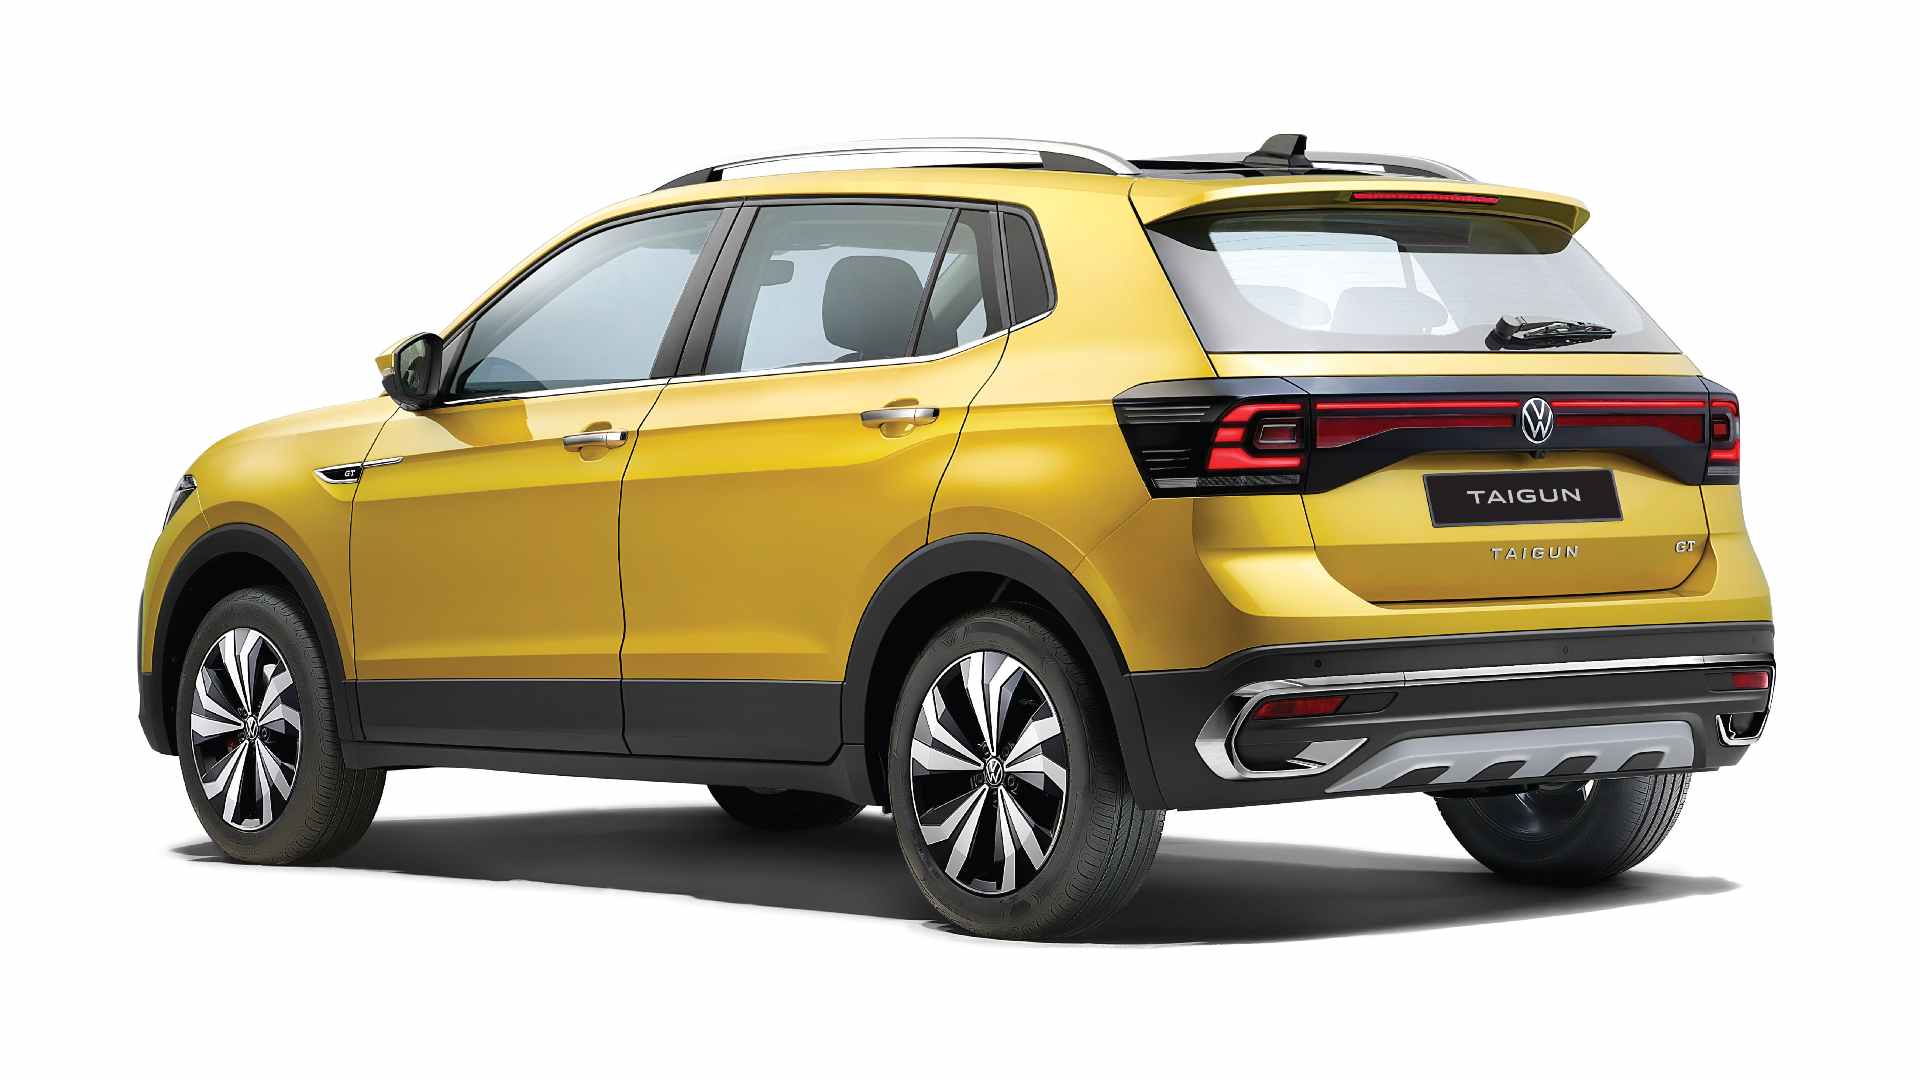 Full-width LED tail-lights (encased in a black finish) aim to make the Taigun look wider than it is. Image: Volkswagen